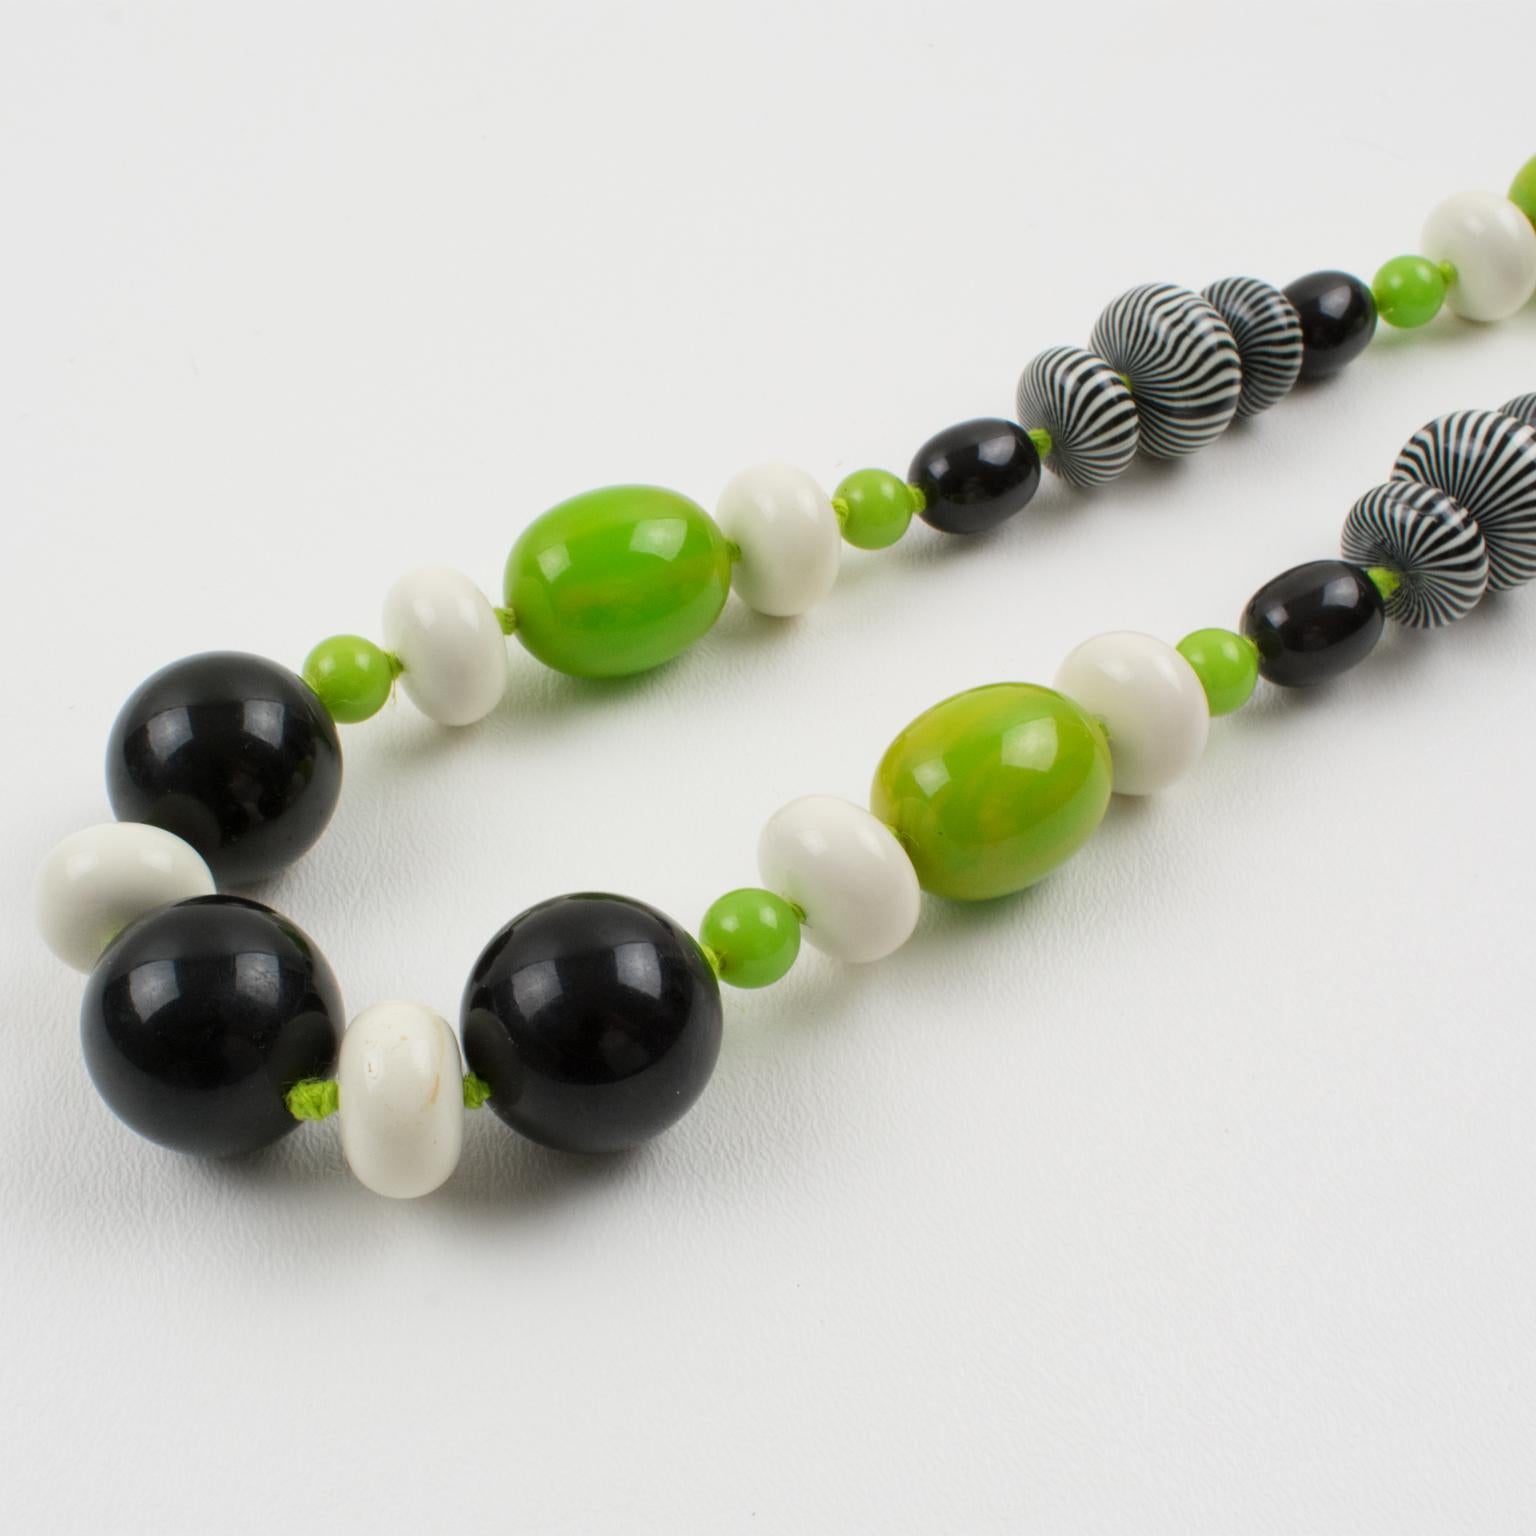 Bakelite and Lucite Necklace Extra Long Shape Black, White and Apple Green Beads 2